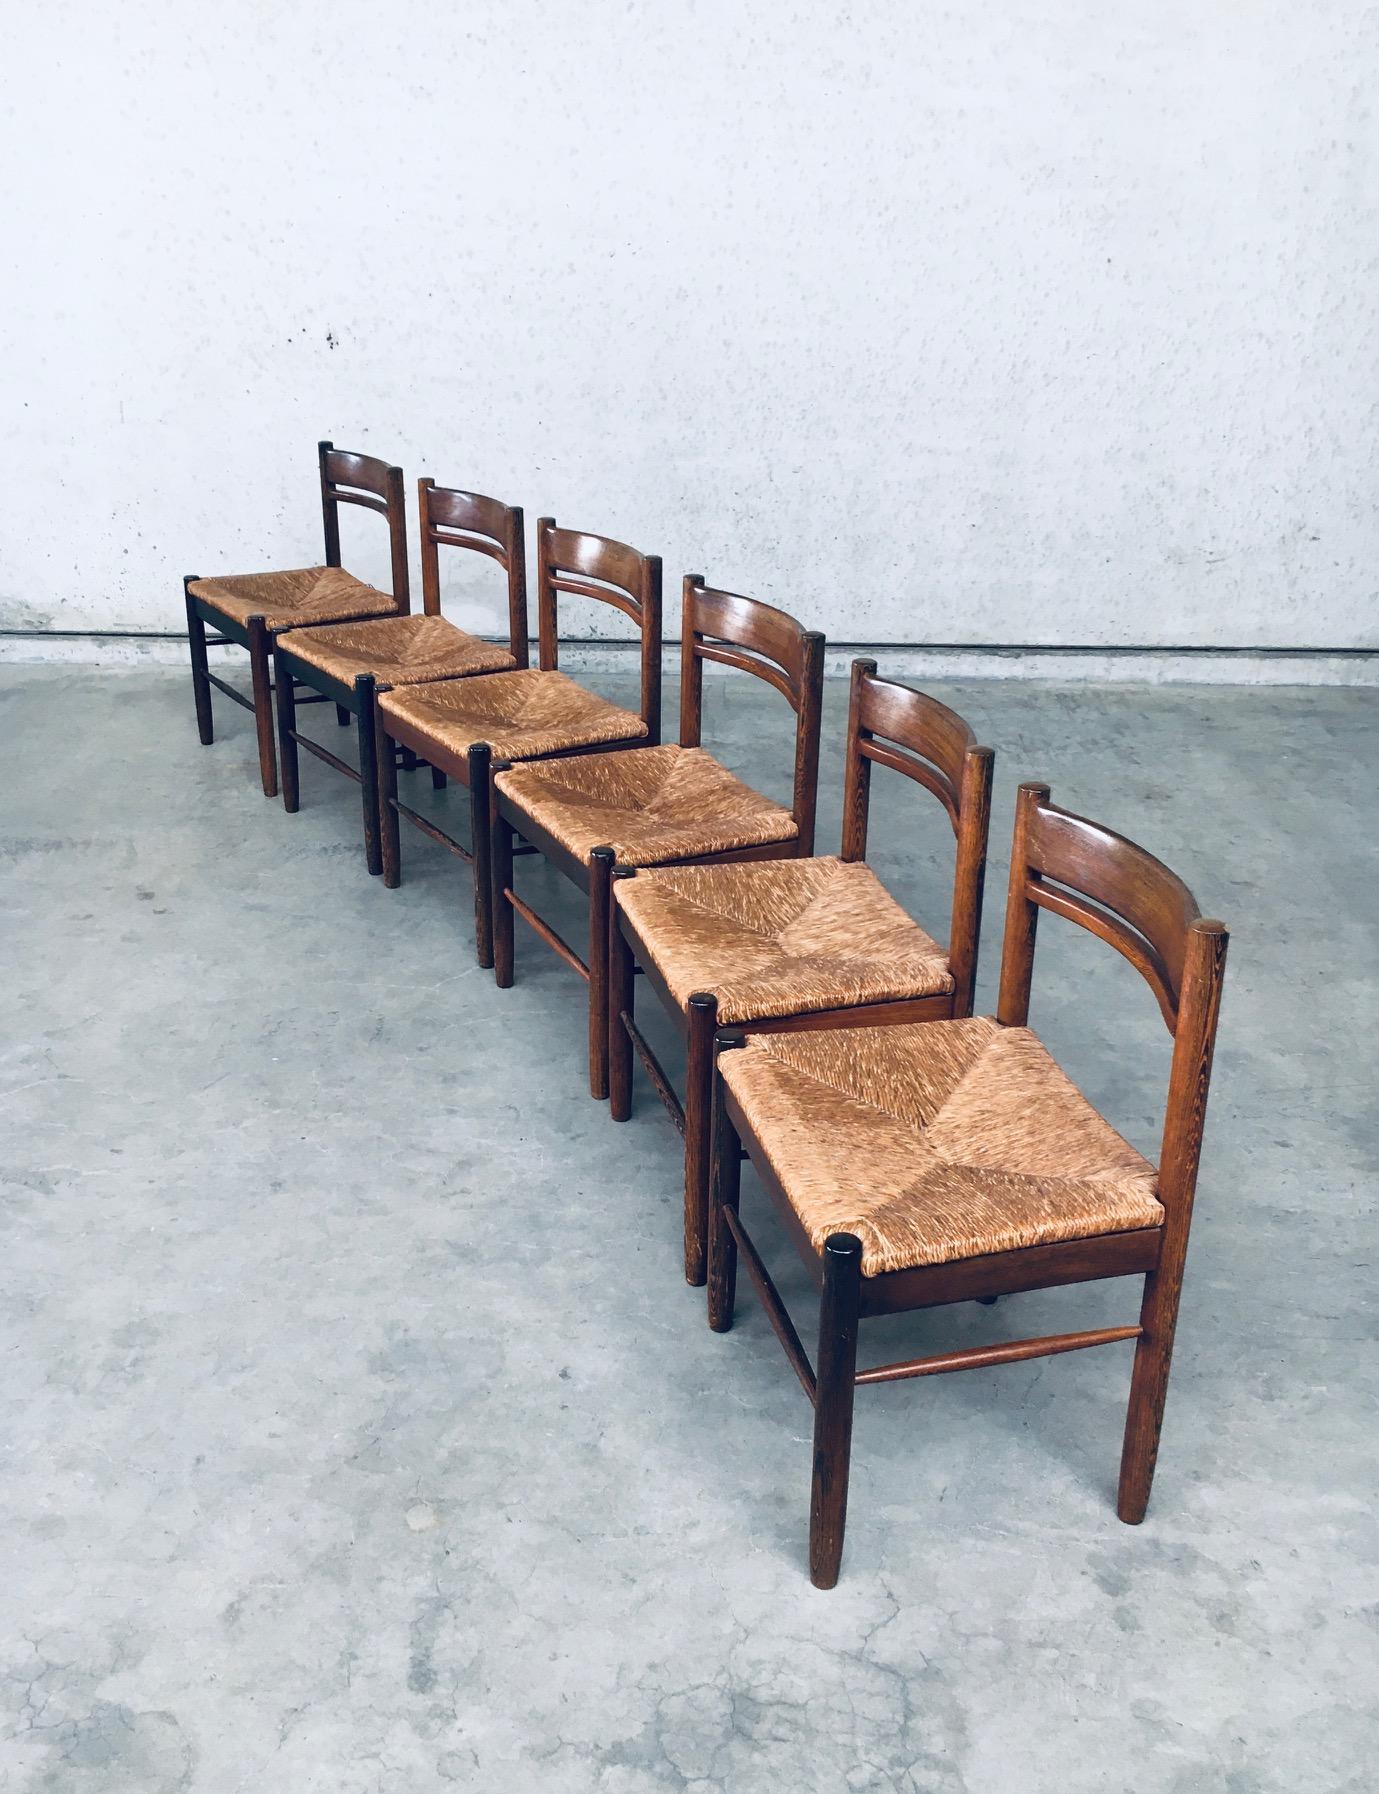 Vintage Mid-Century Modern Design Wengé & Paper Cord Dining Chair set of 6. Made Belgium in the 1960's. Wengé wood constructed chairs with paper cord / rush seats. Chairs are in very good condition. On one chair there needs to be some replacing of